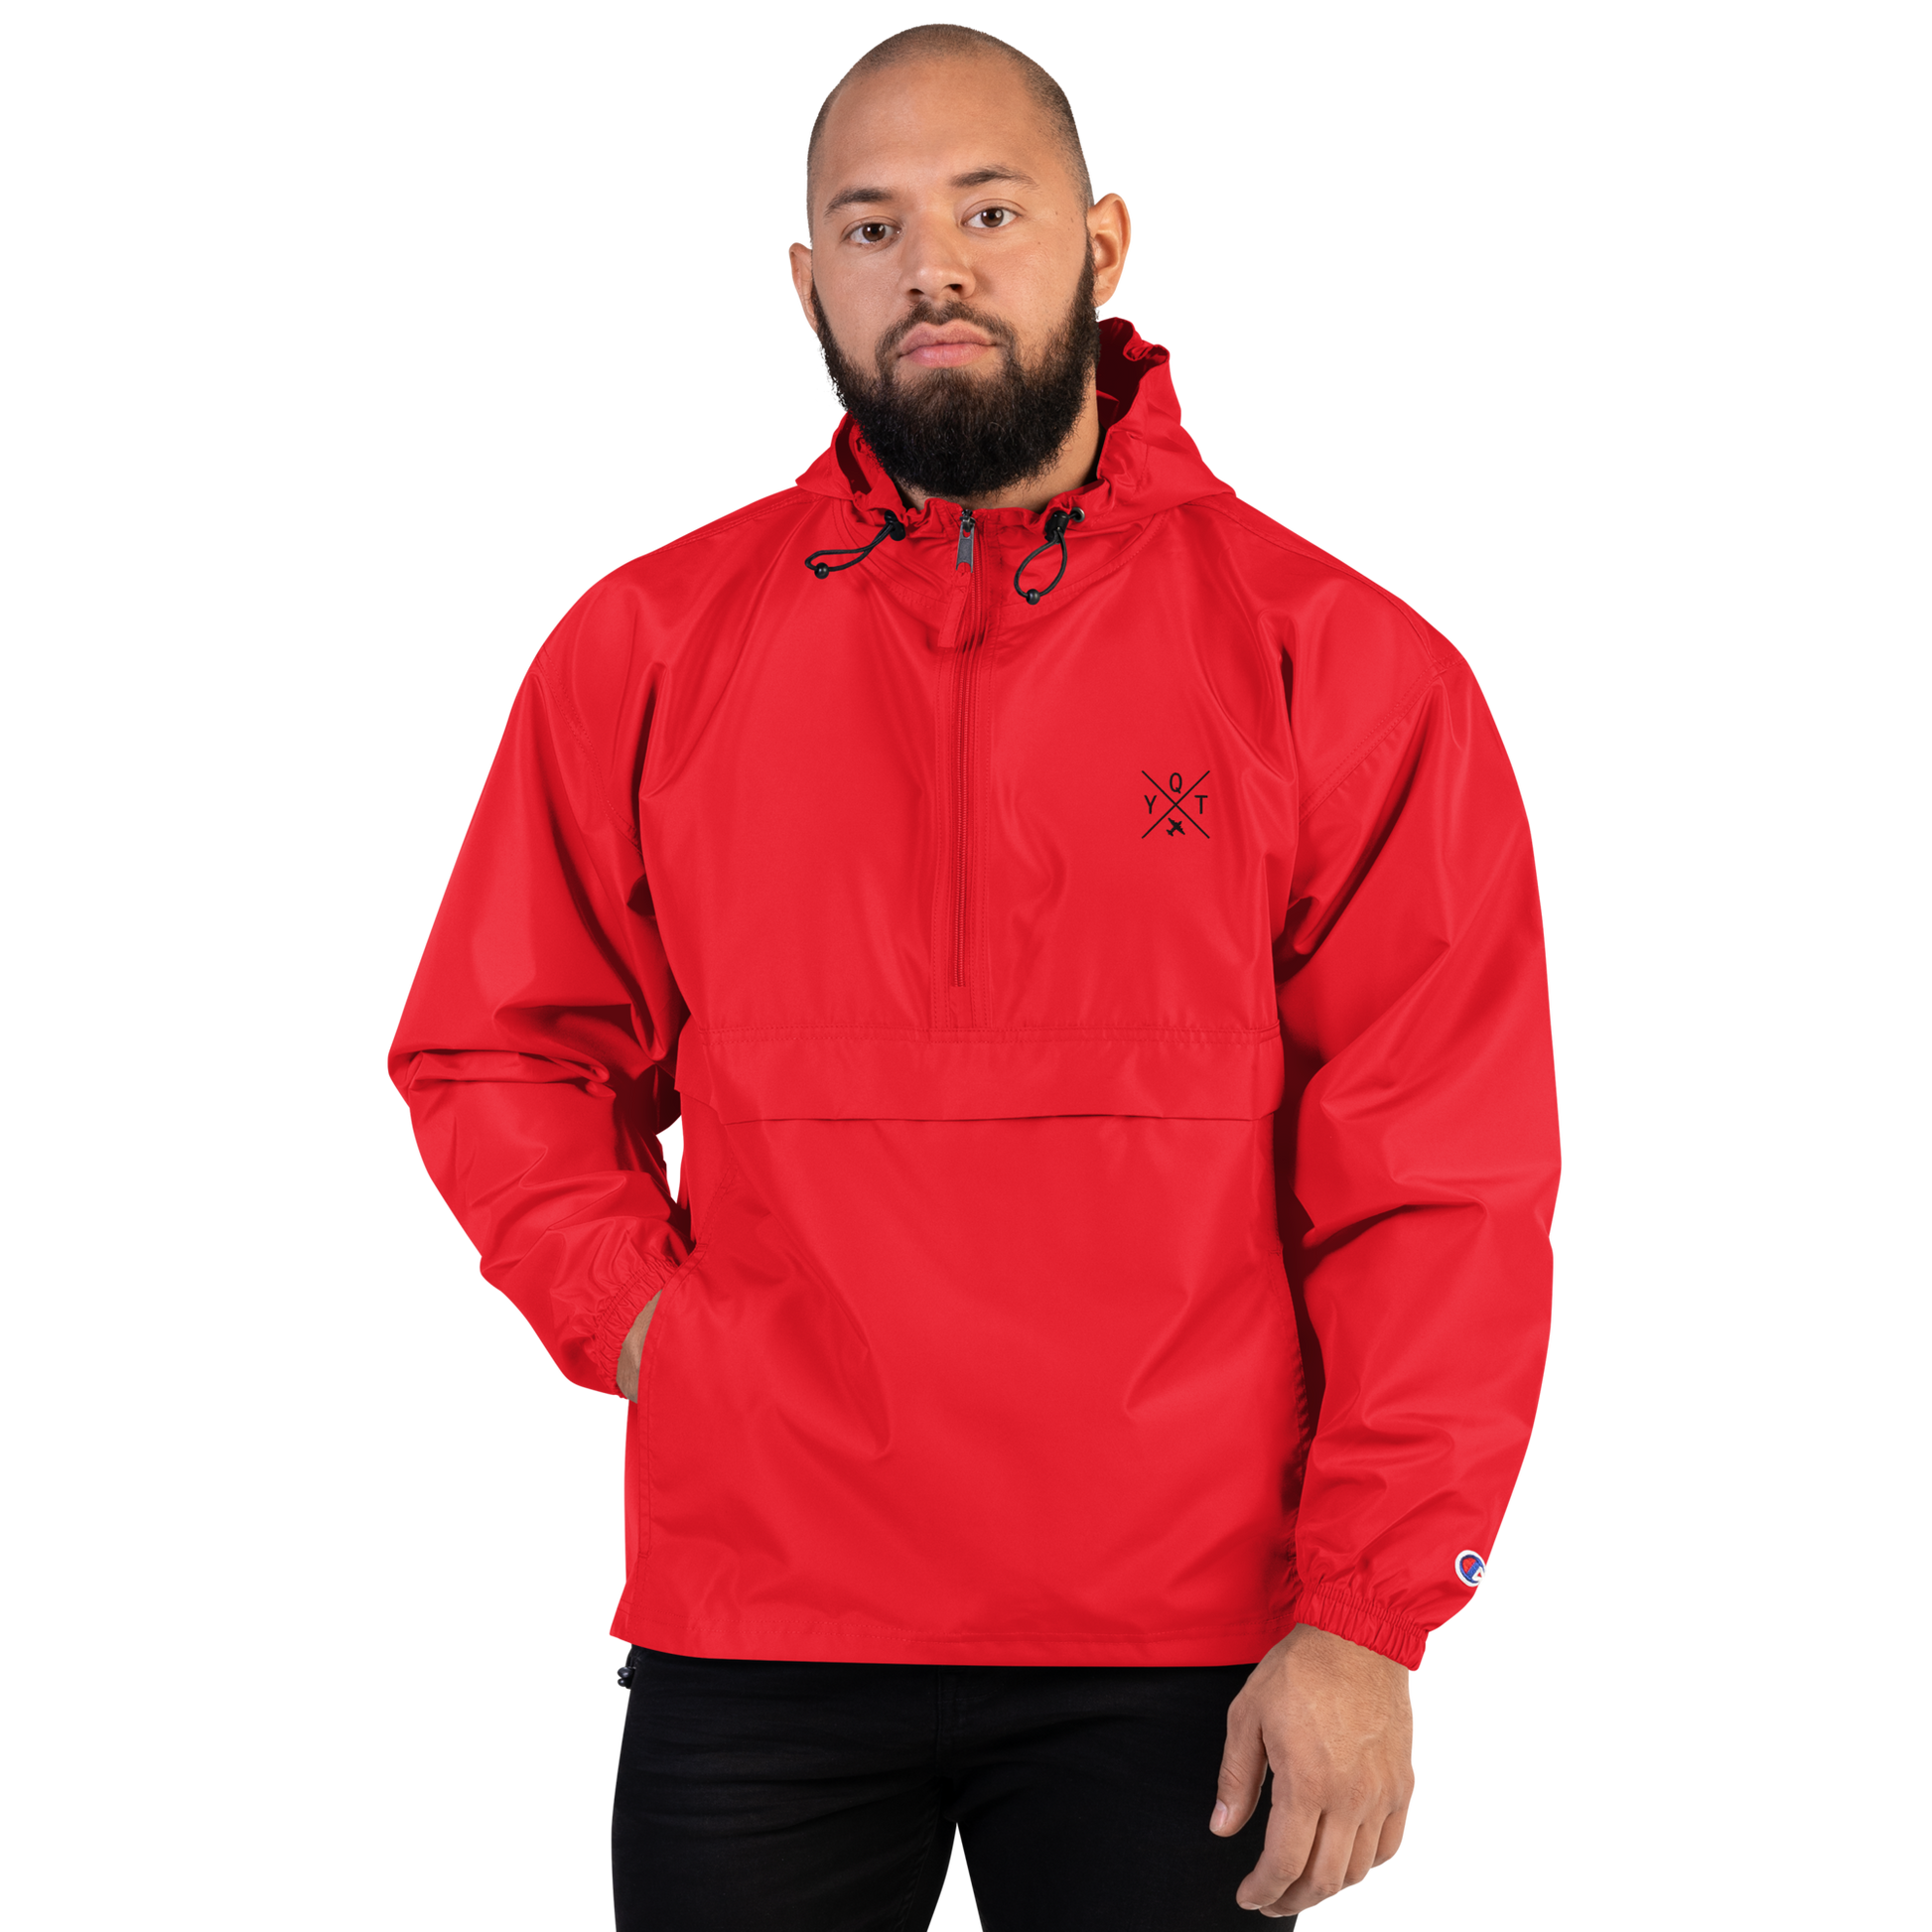 Crossed-X Packable Jacket • YQT Thunder Bay • YHM Designs - Image 11